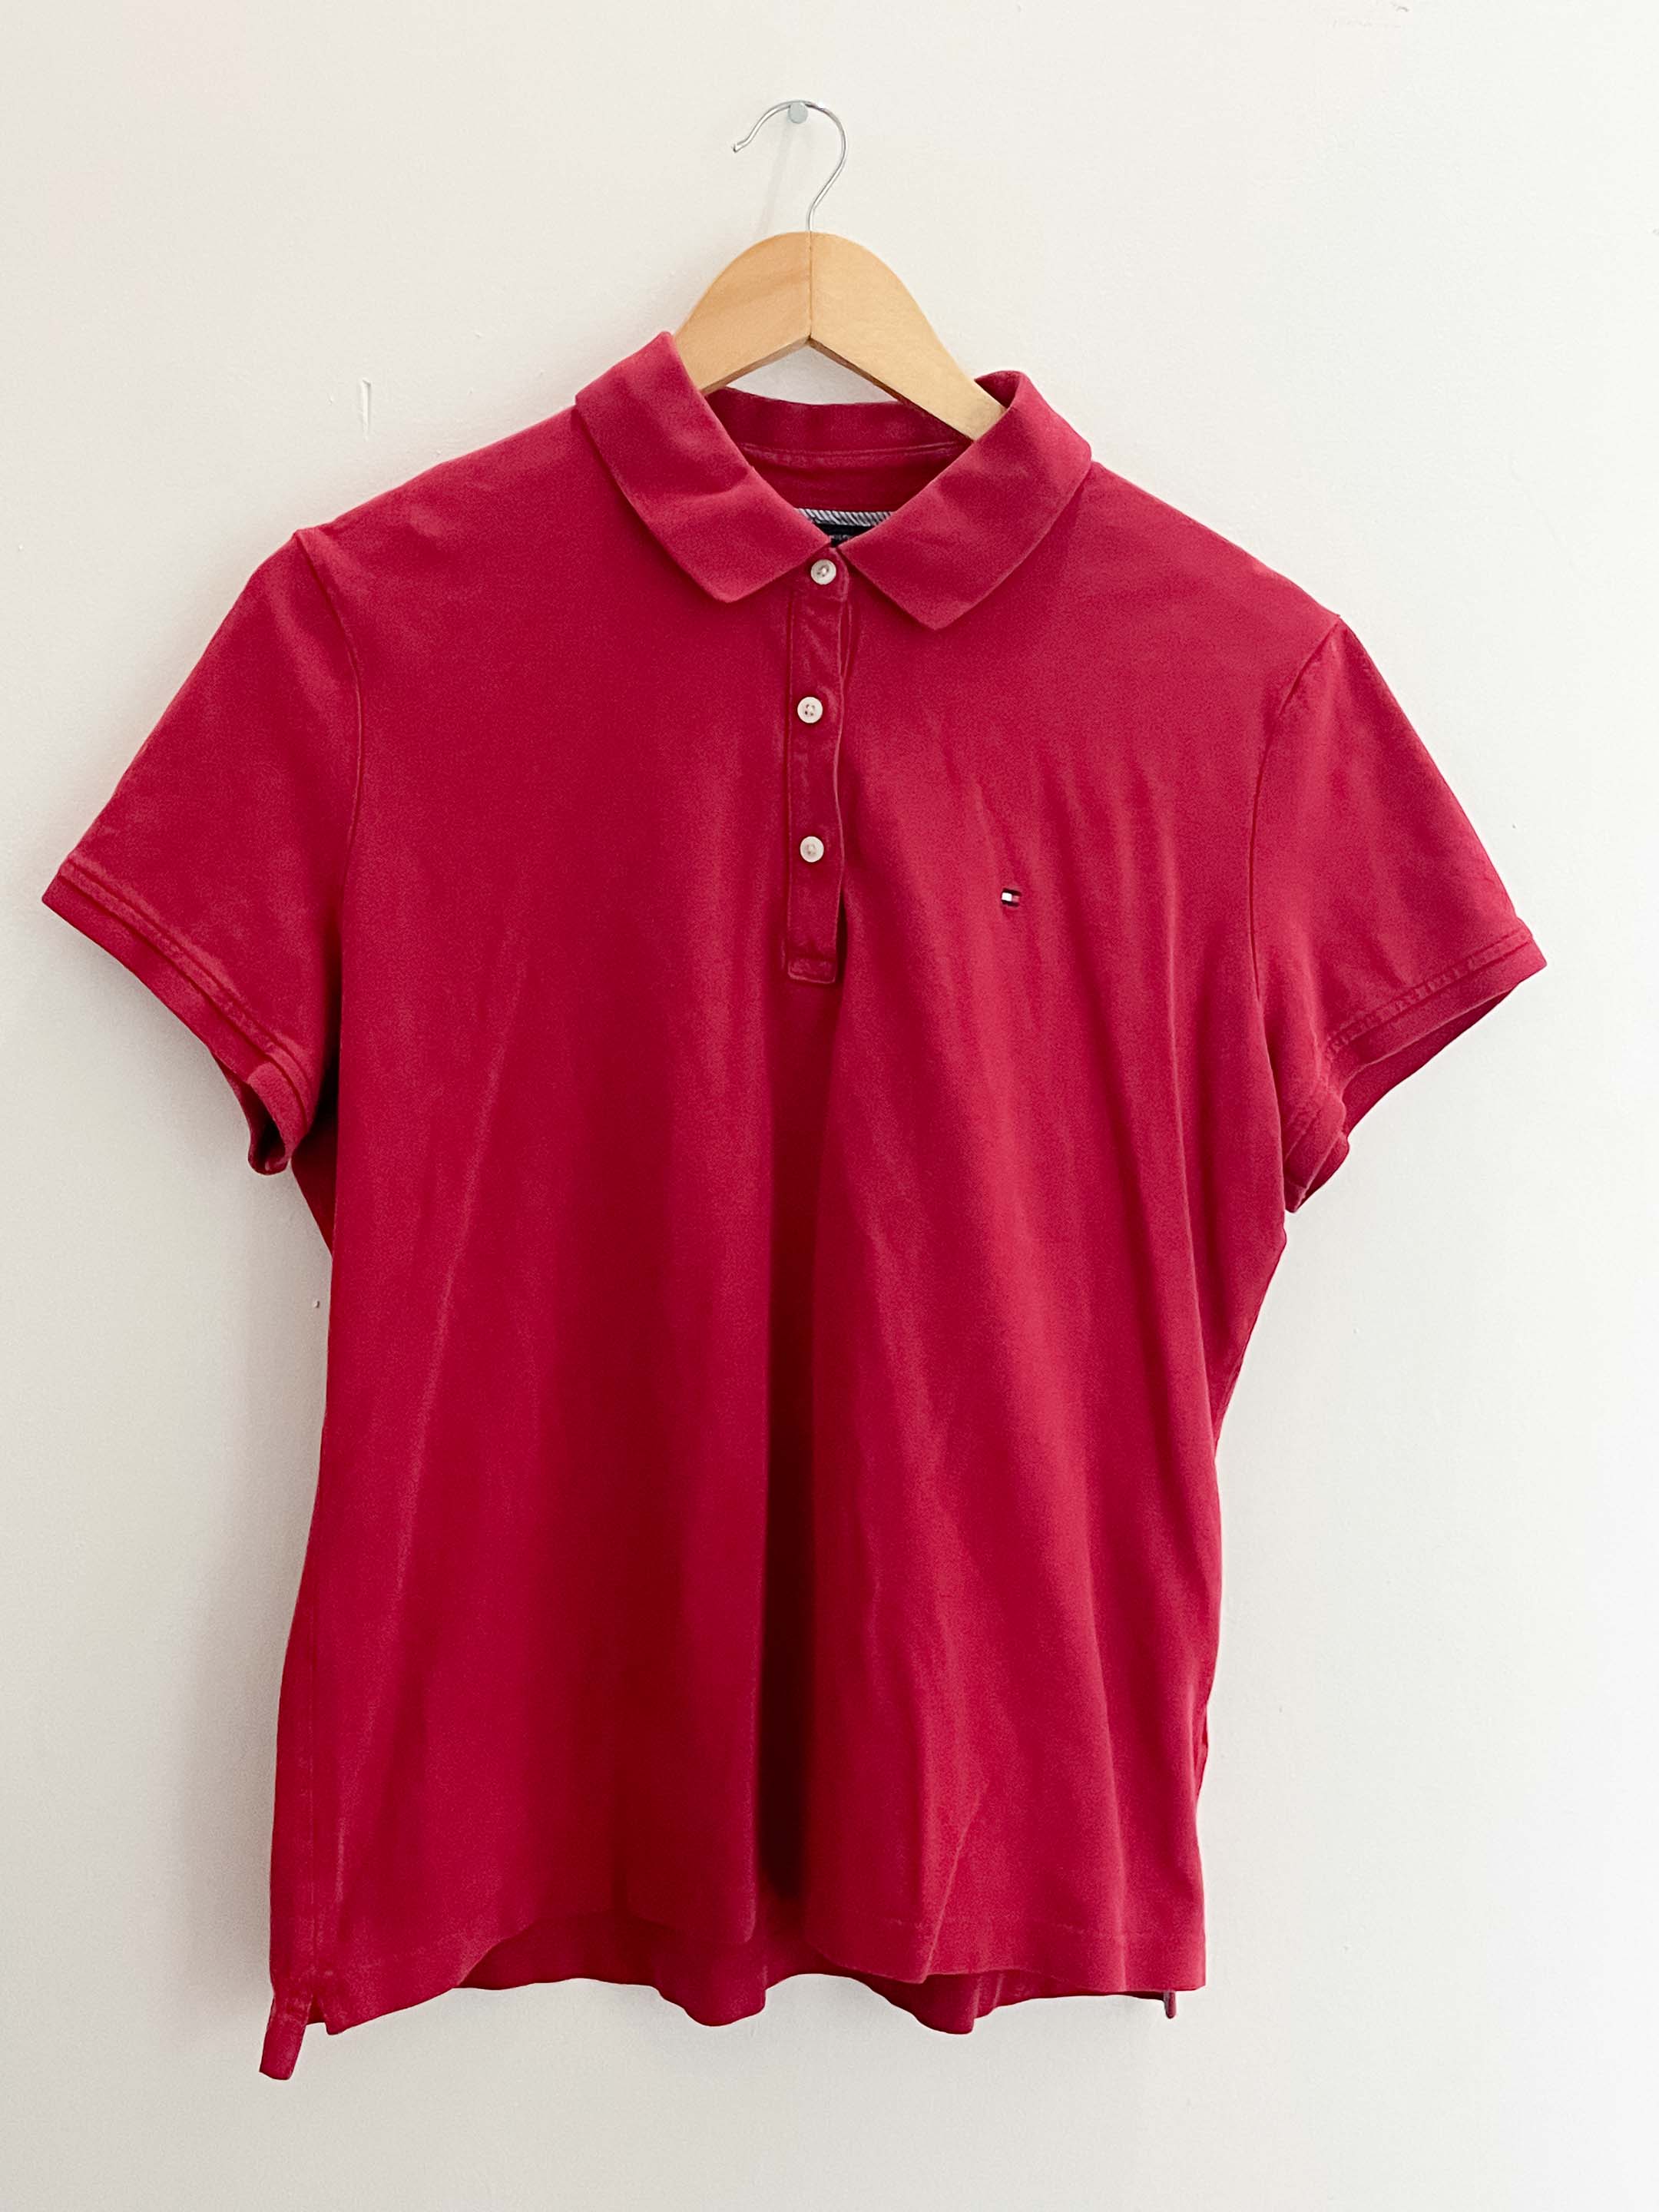 Vintage red mens tommy hilfiger polo shirt size XL